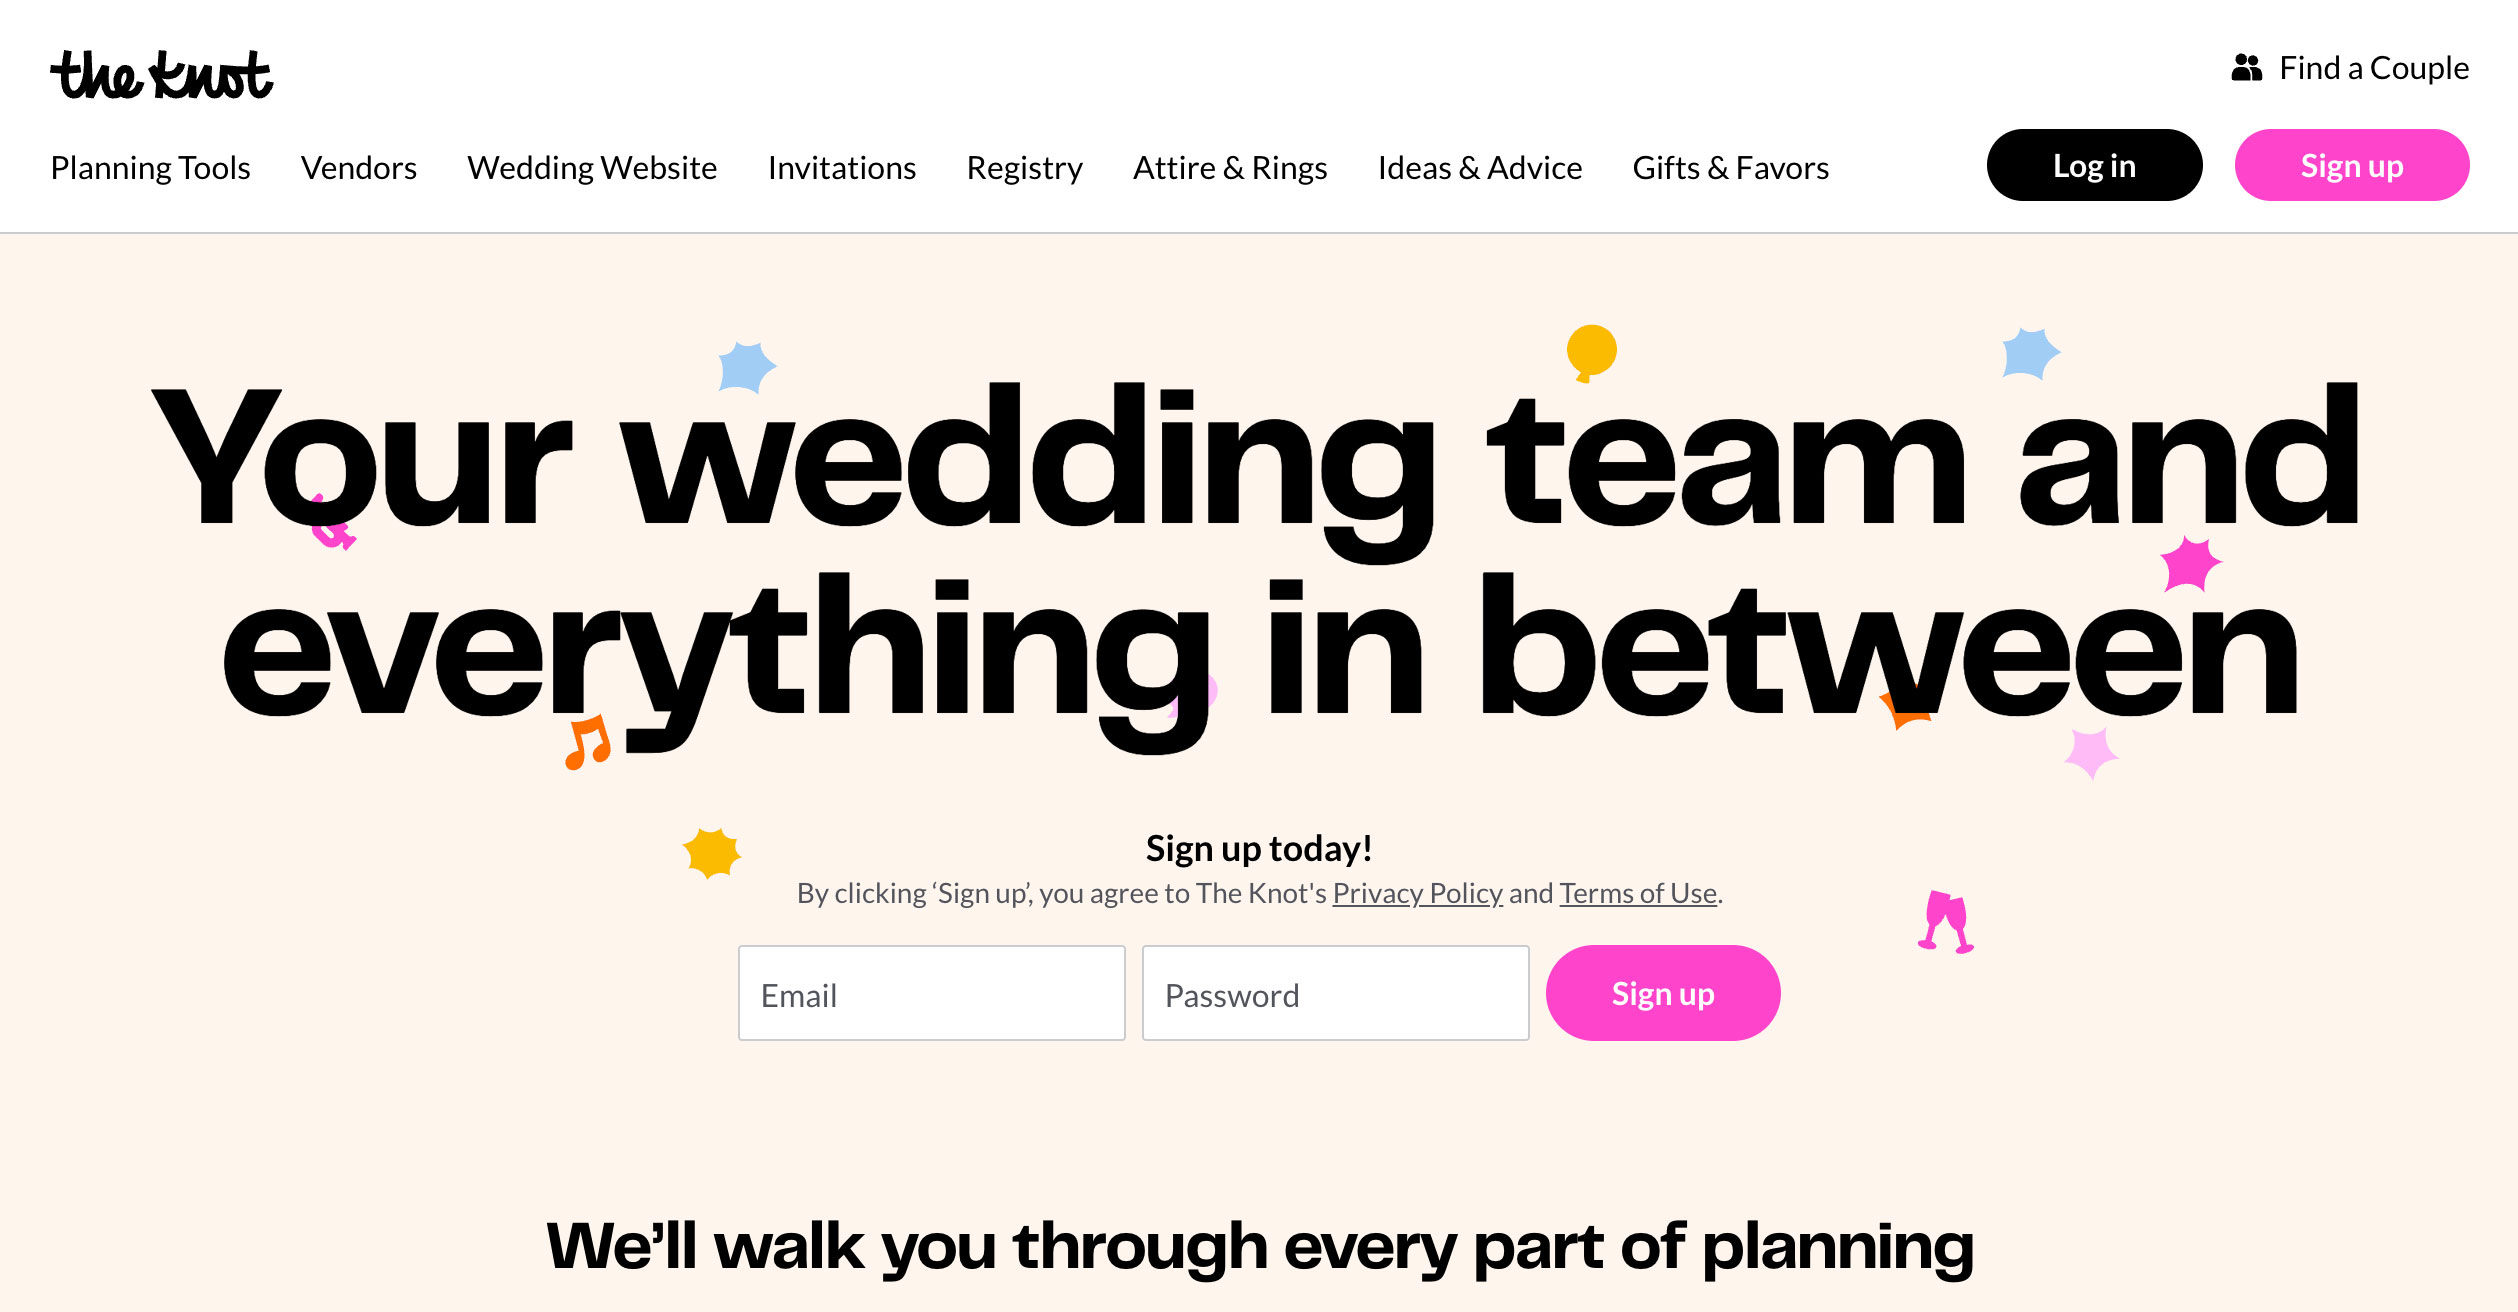 spots opportunity and launches its own wedding registry